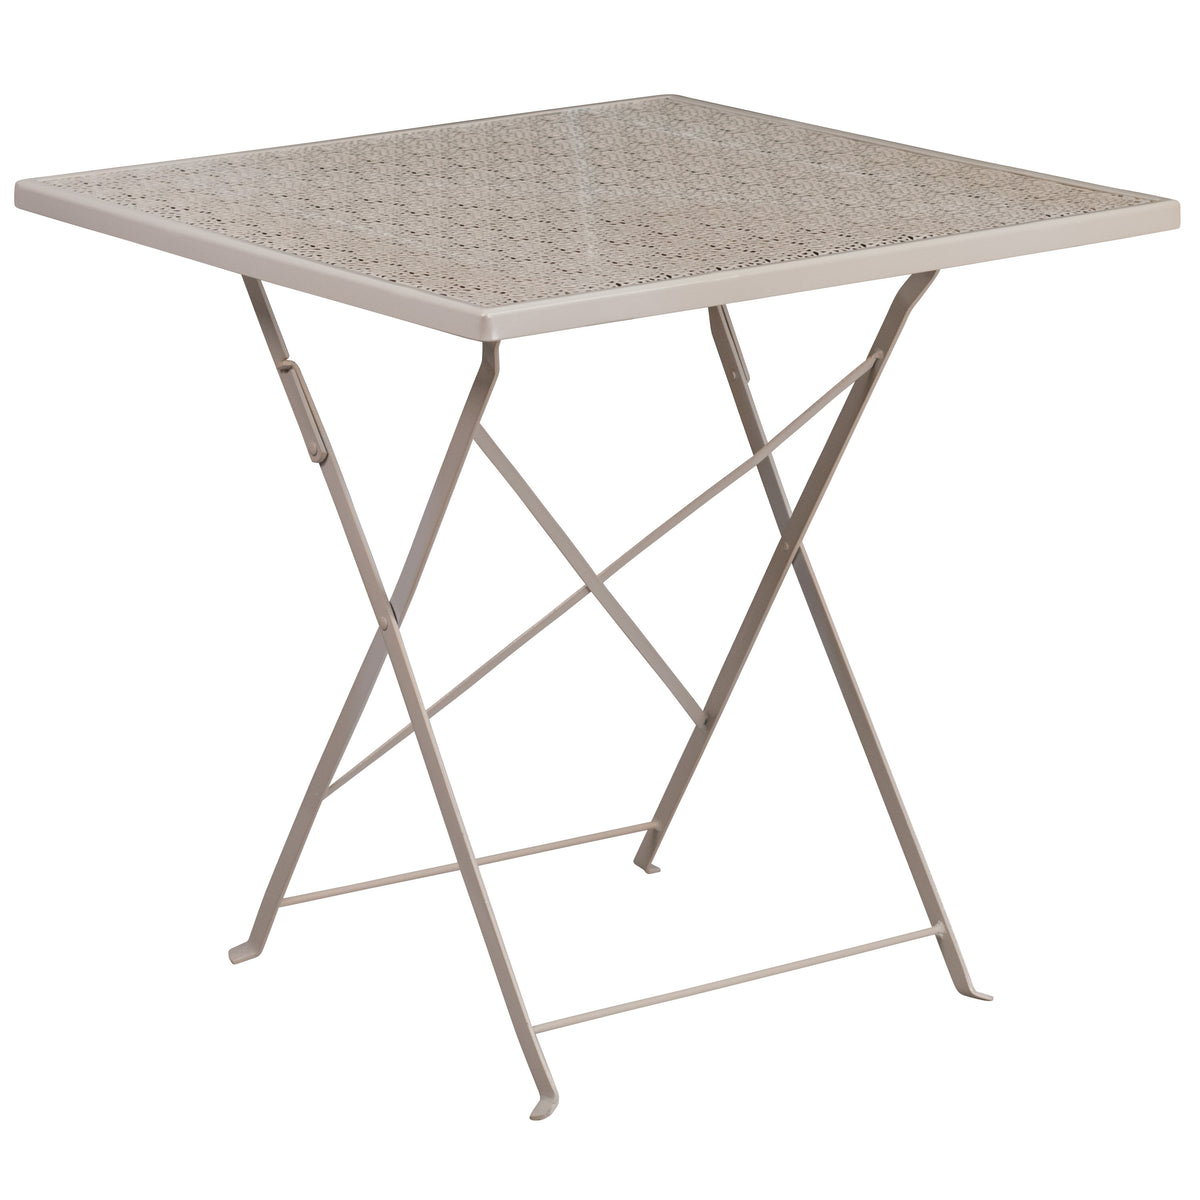 Light Gray |#| 28inch Square Light Gray Indoor-Outdoor Steel Folding Patio Table - Home Furniture